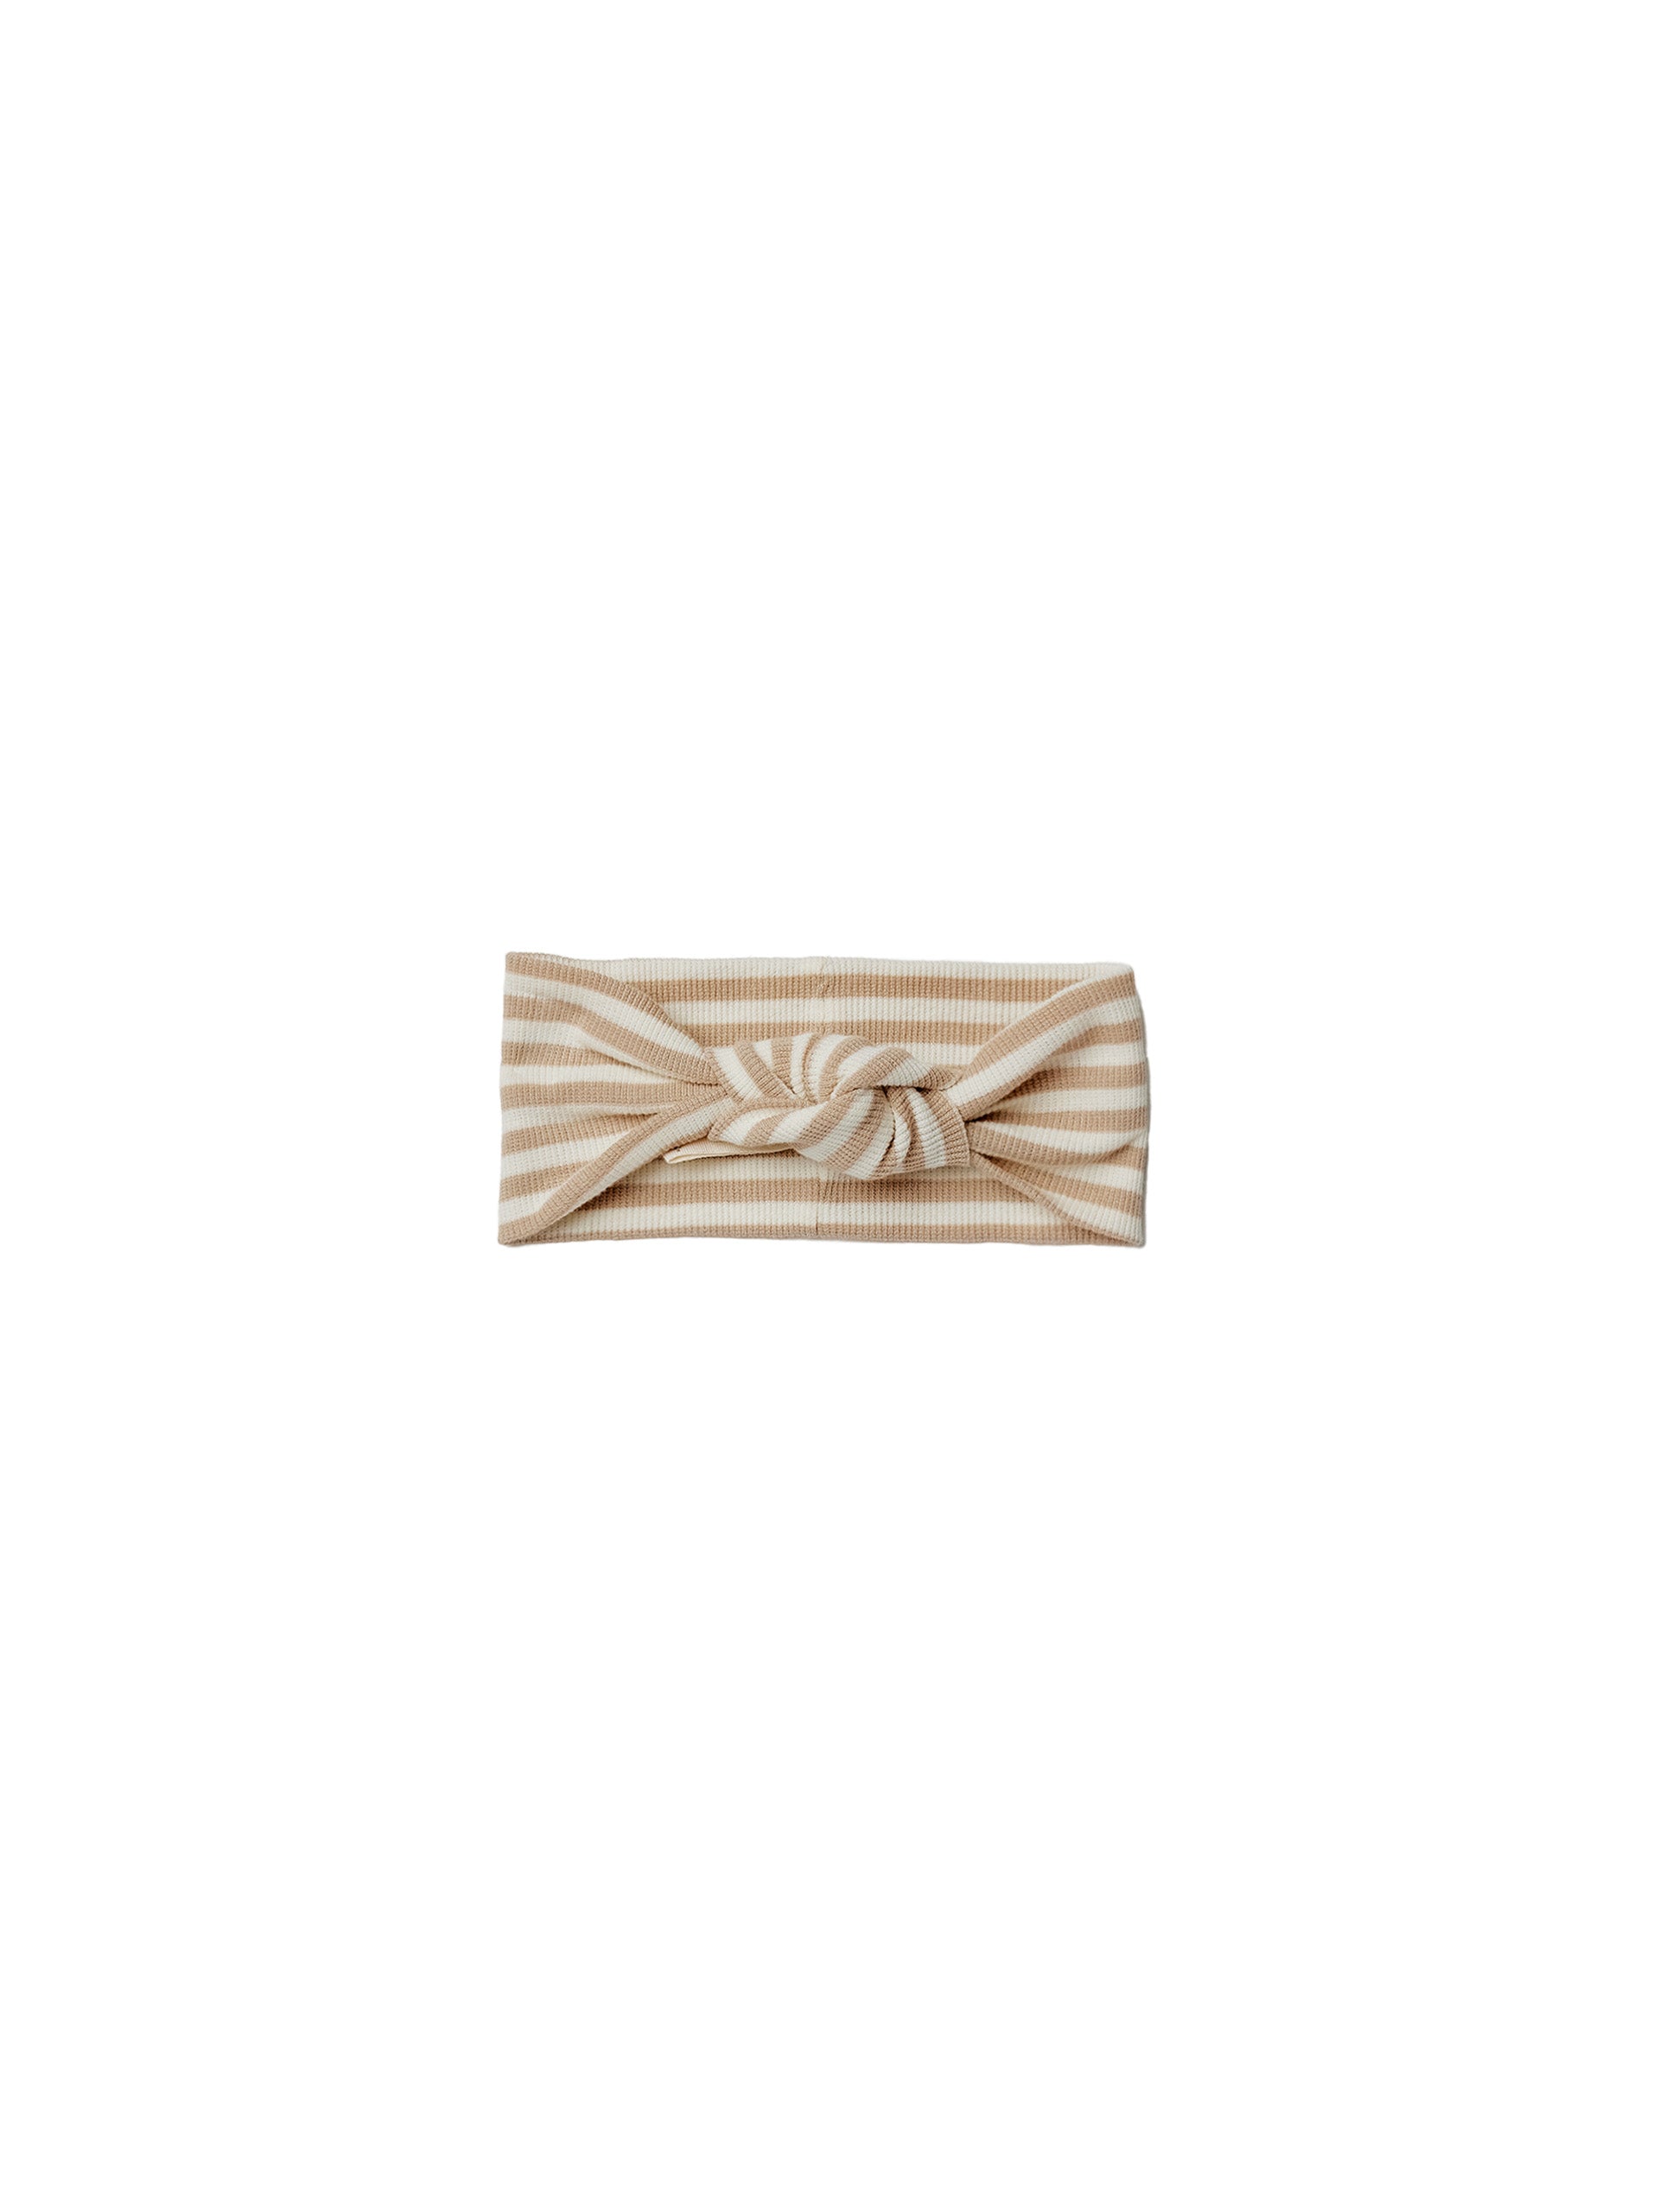 QUINCY MAE RIBBED KNOTTED HEADBAND / LATTE STRIPE